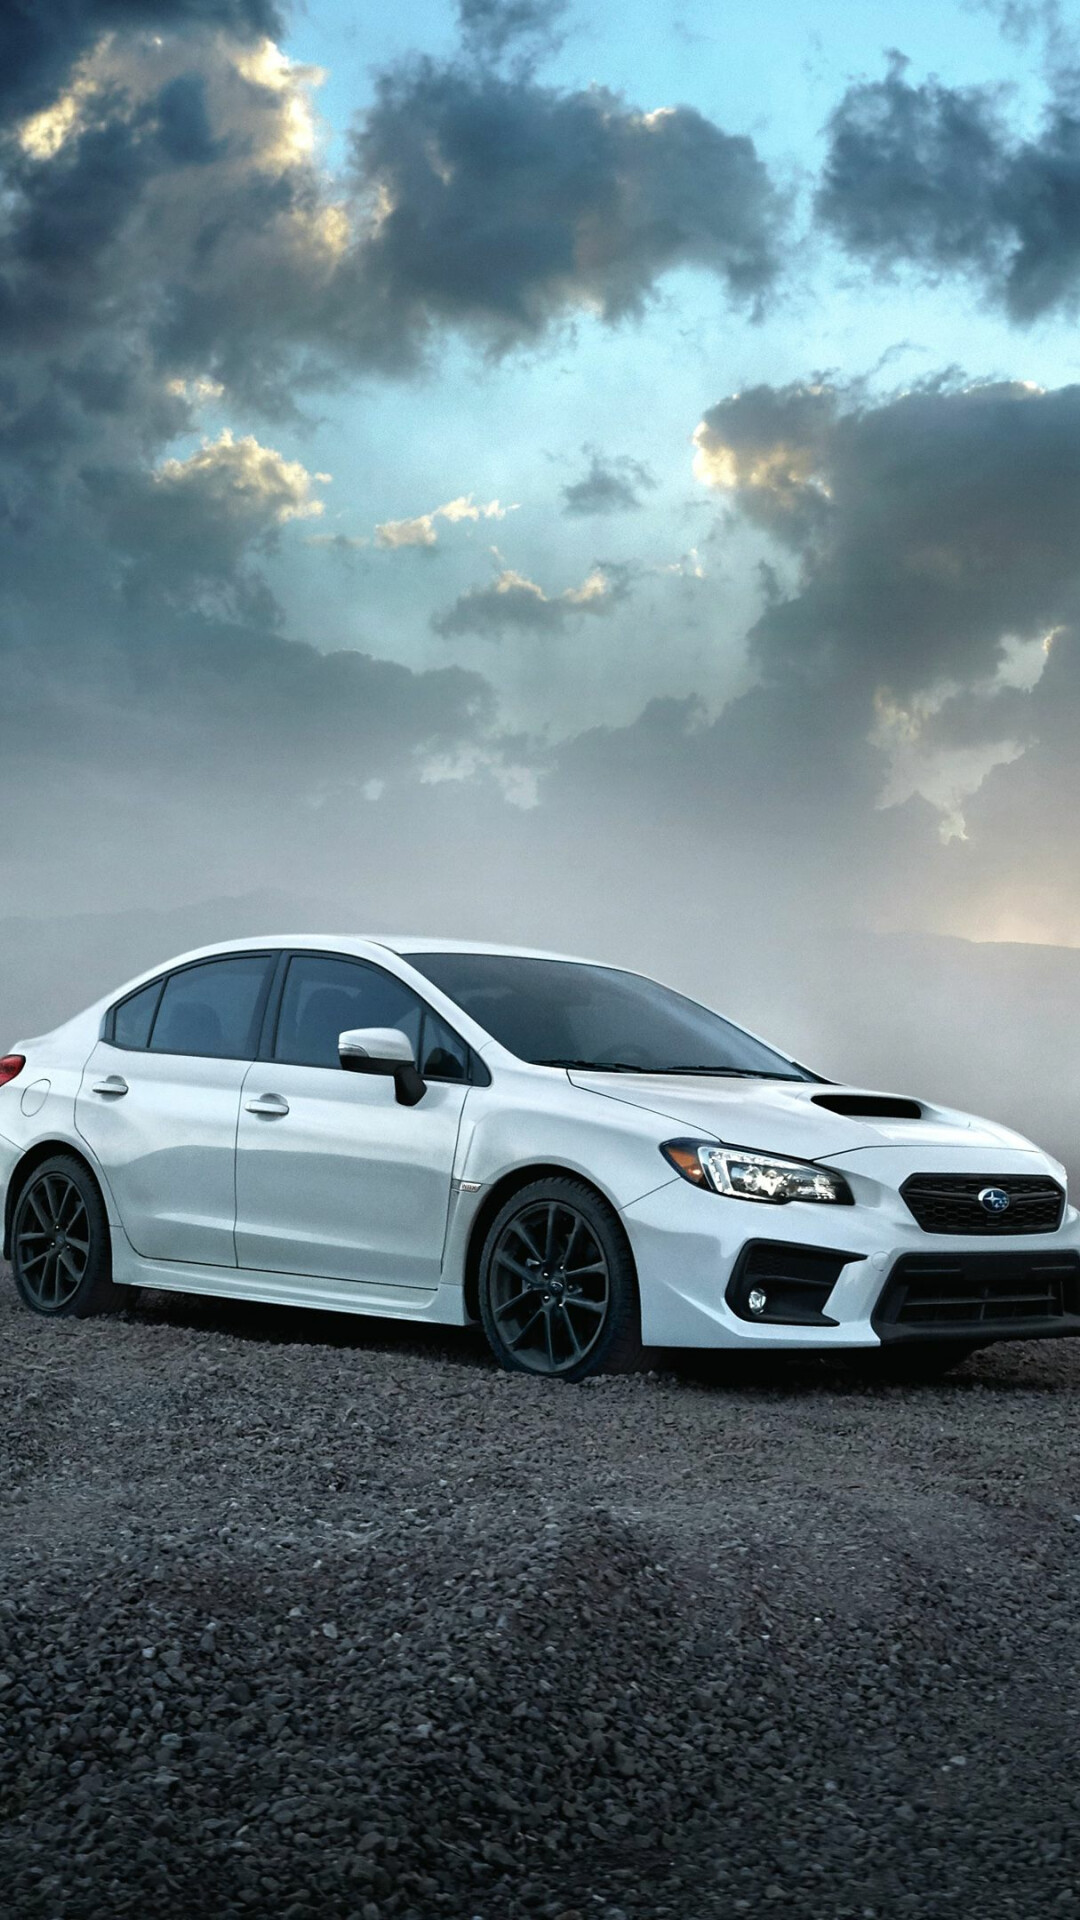 Subaru: A compact sedan that holds on to its rally roots with a 2.0-liter turbocharged engine that sends power to all four wheels,  WRX, 2019. 1080x1920 Full HD Wallpaper.